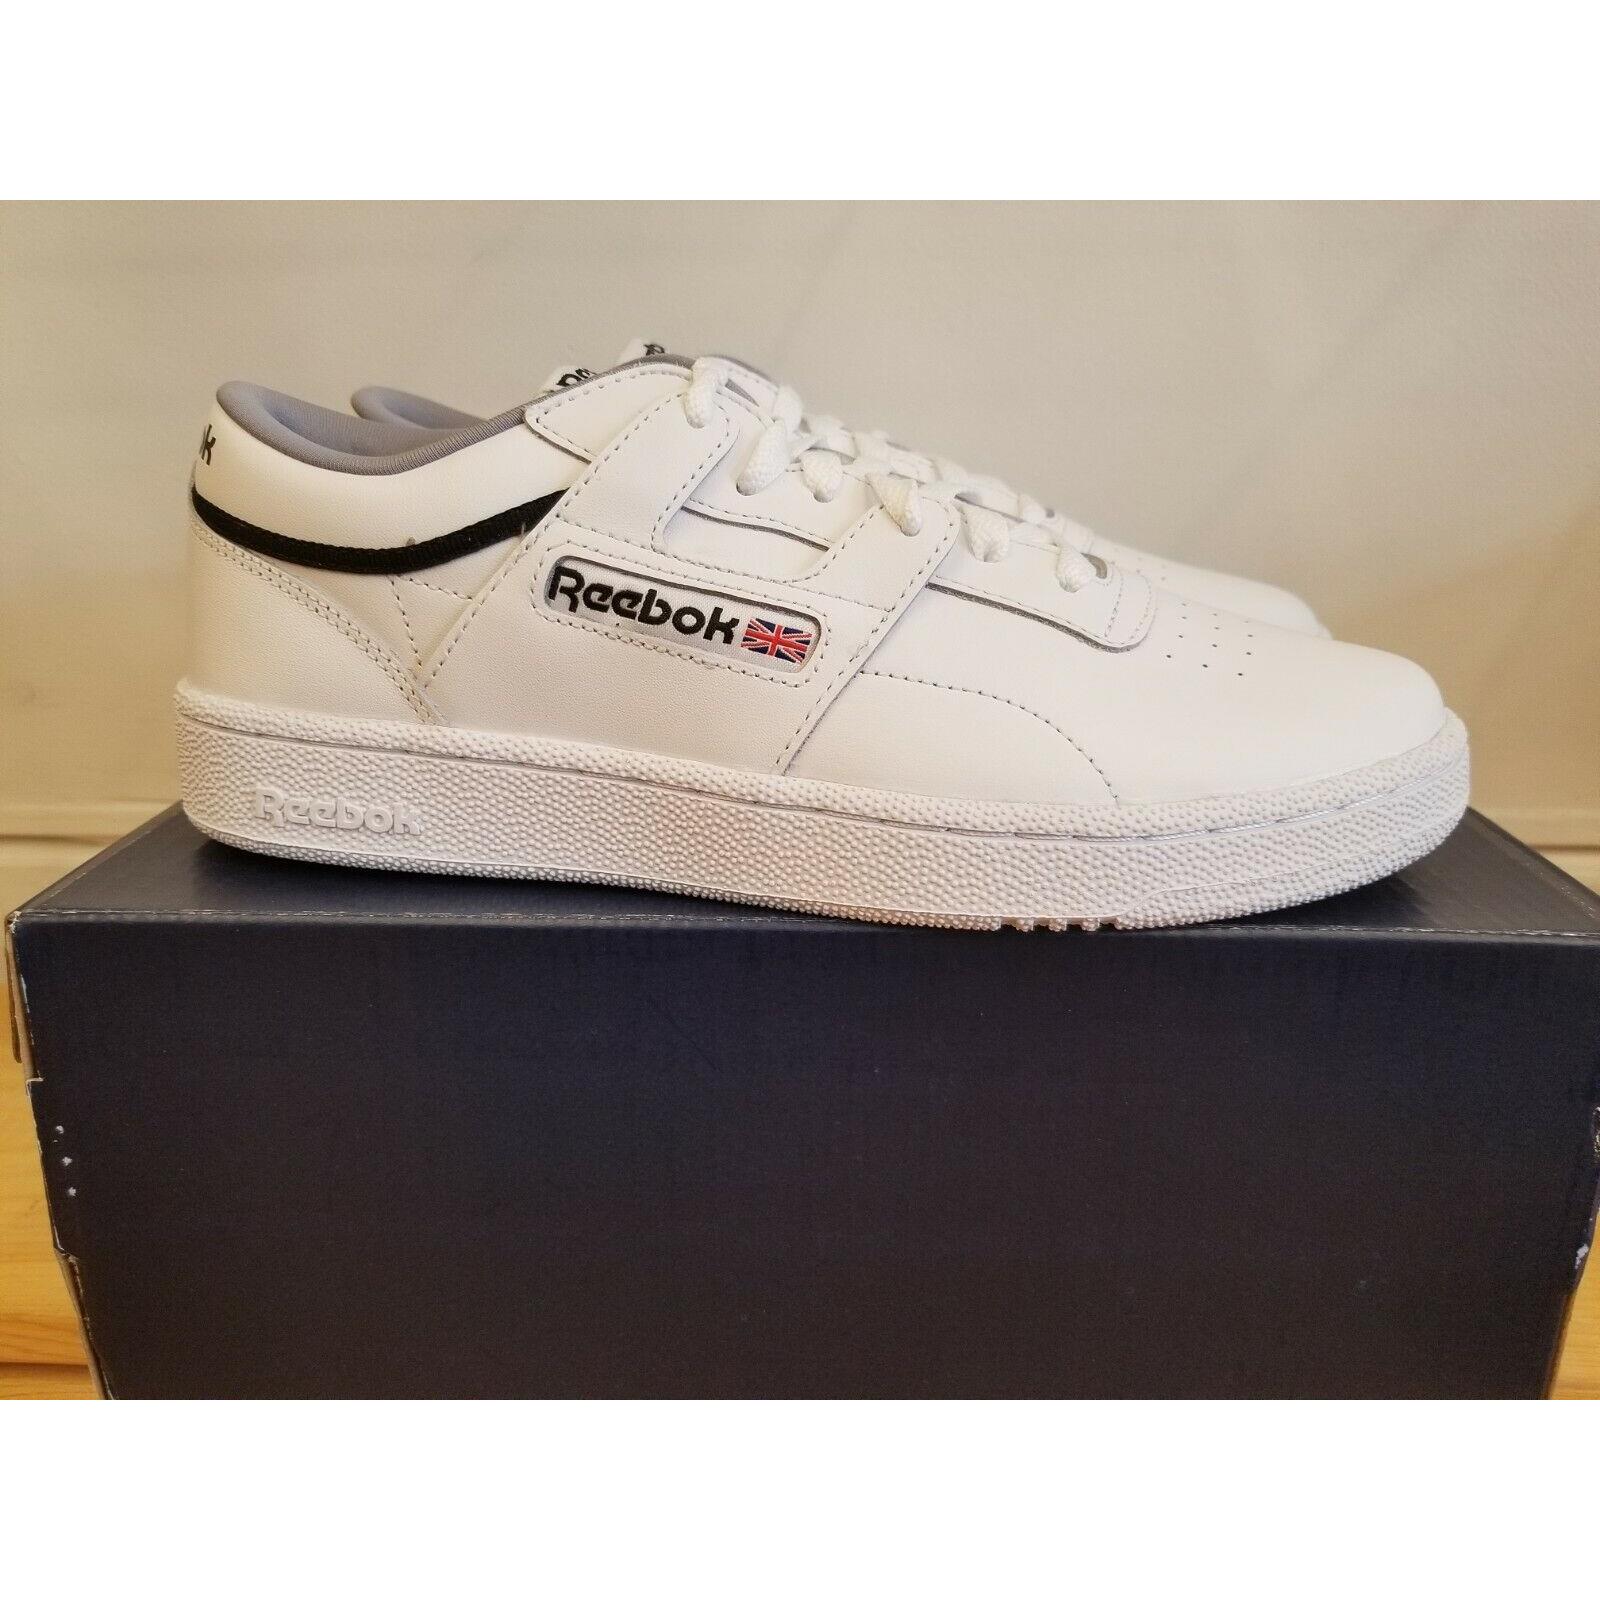 Reebok Club Workout White Leather Lifestyle Sneaker Shoes Everyday For Men